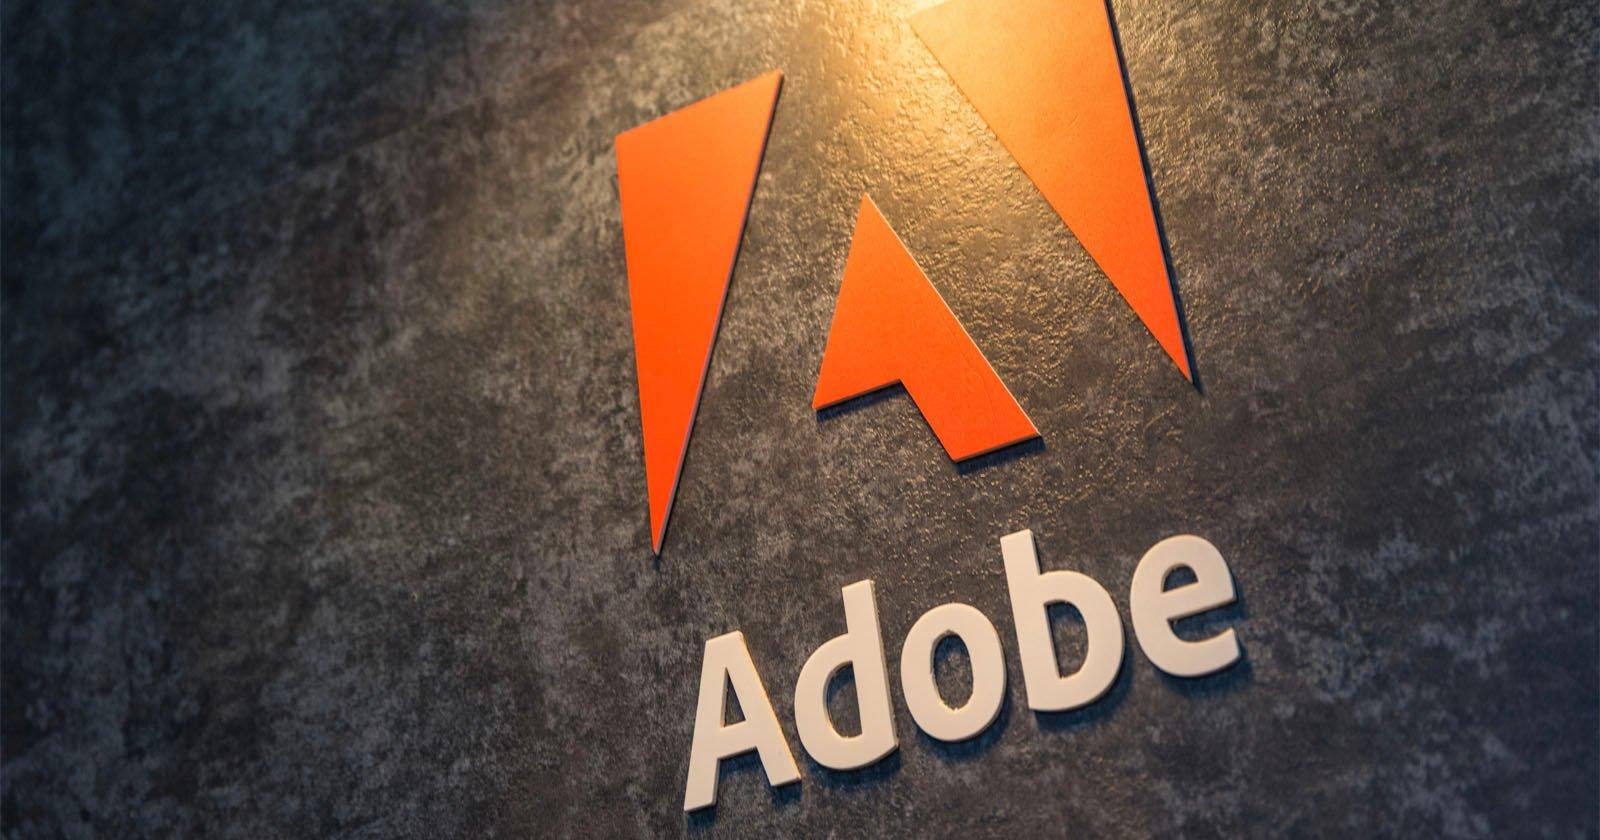 Adobe Exec Says AI is a 'Revolution' and the 'New Digital Camera'